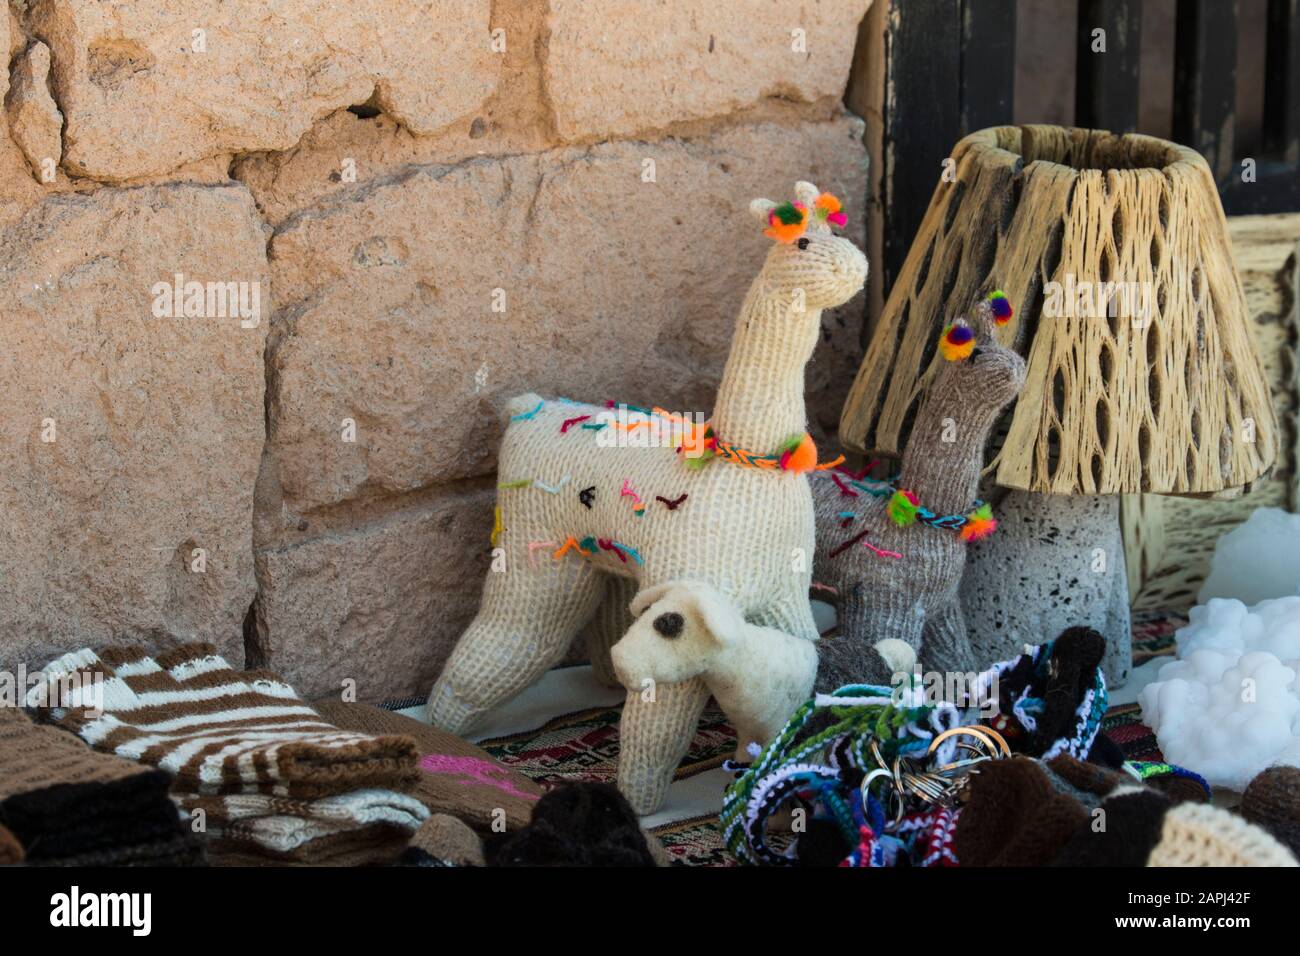 Toy llamas and other items for sale at an outdoor market in Chile Stock Photo